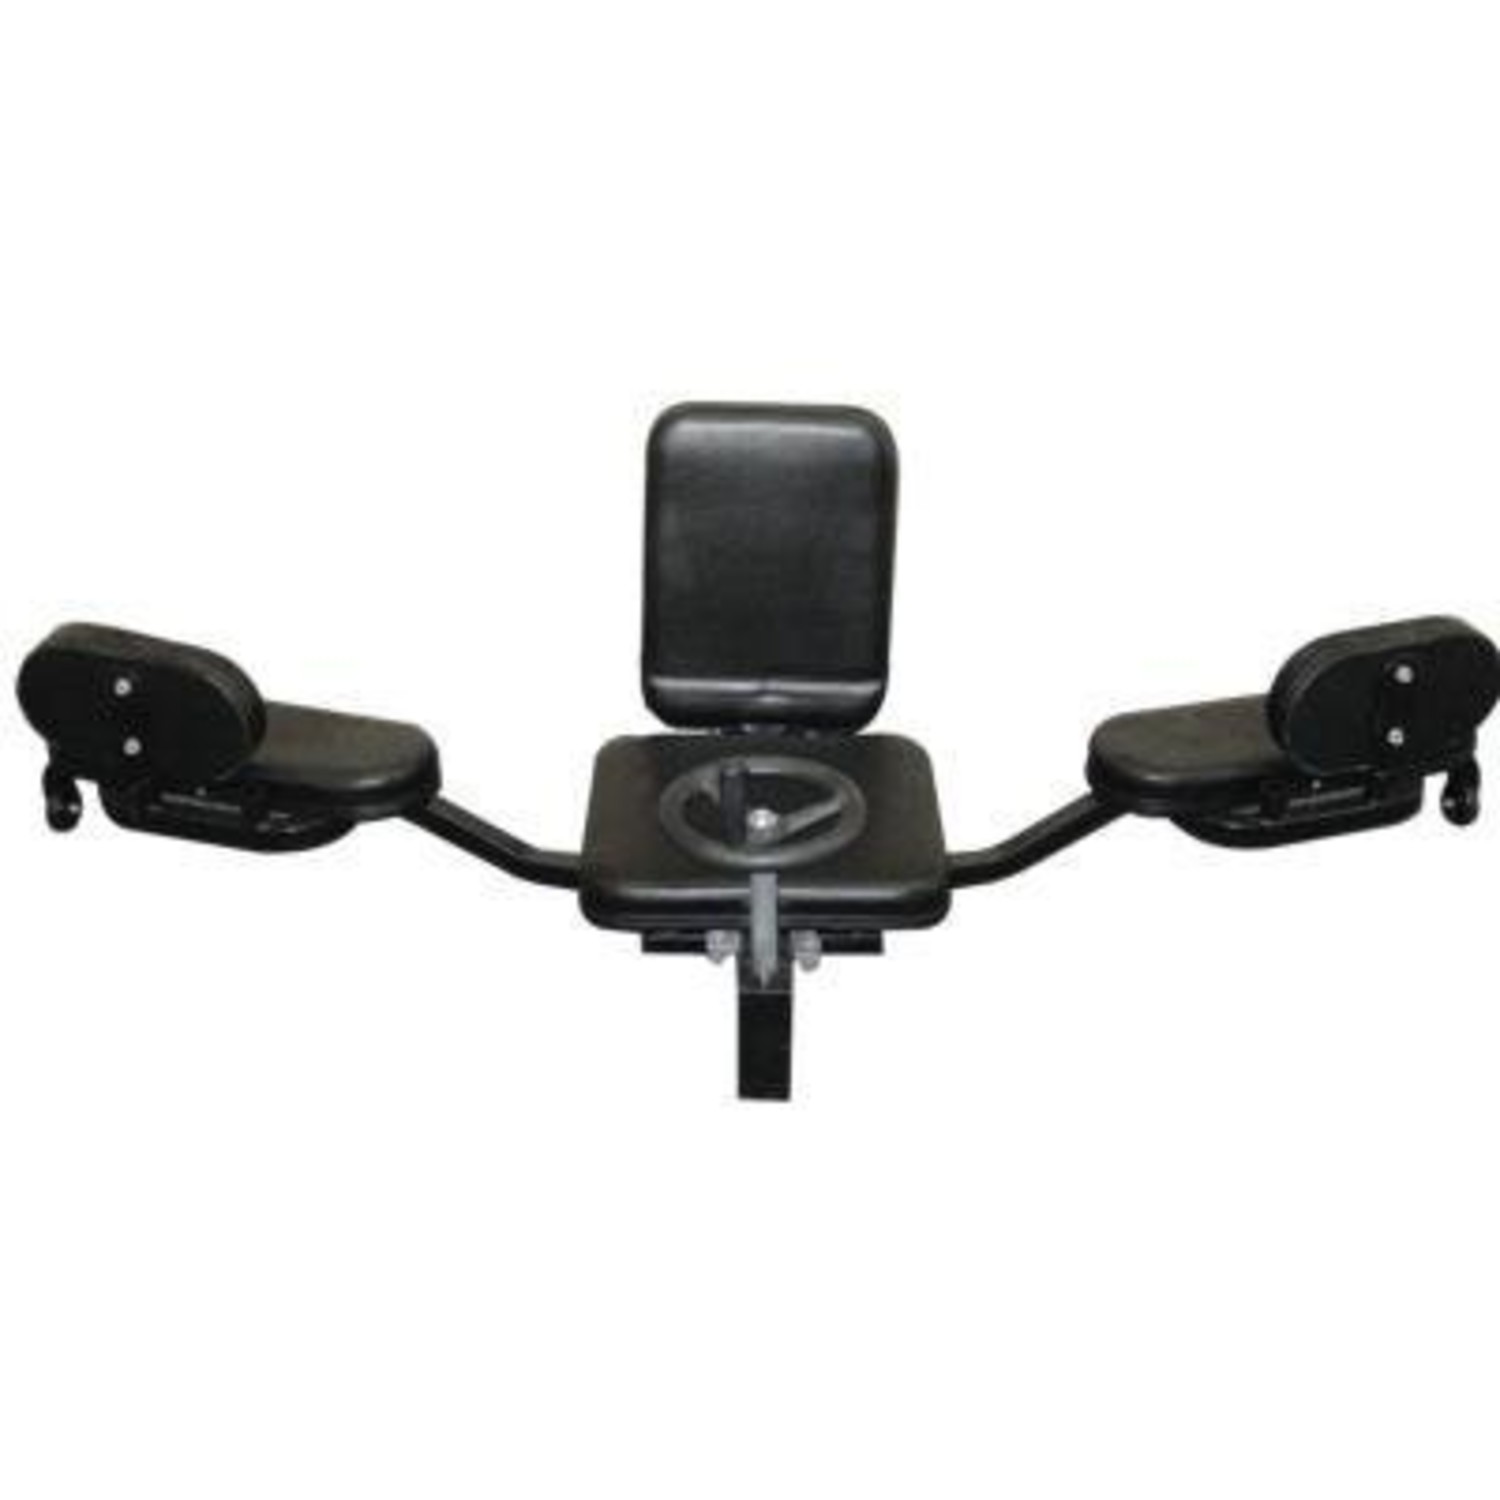 Leg Stretching Machine is the ultimate to improve splits - Enso Martial  Arts Shop Bristol